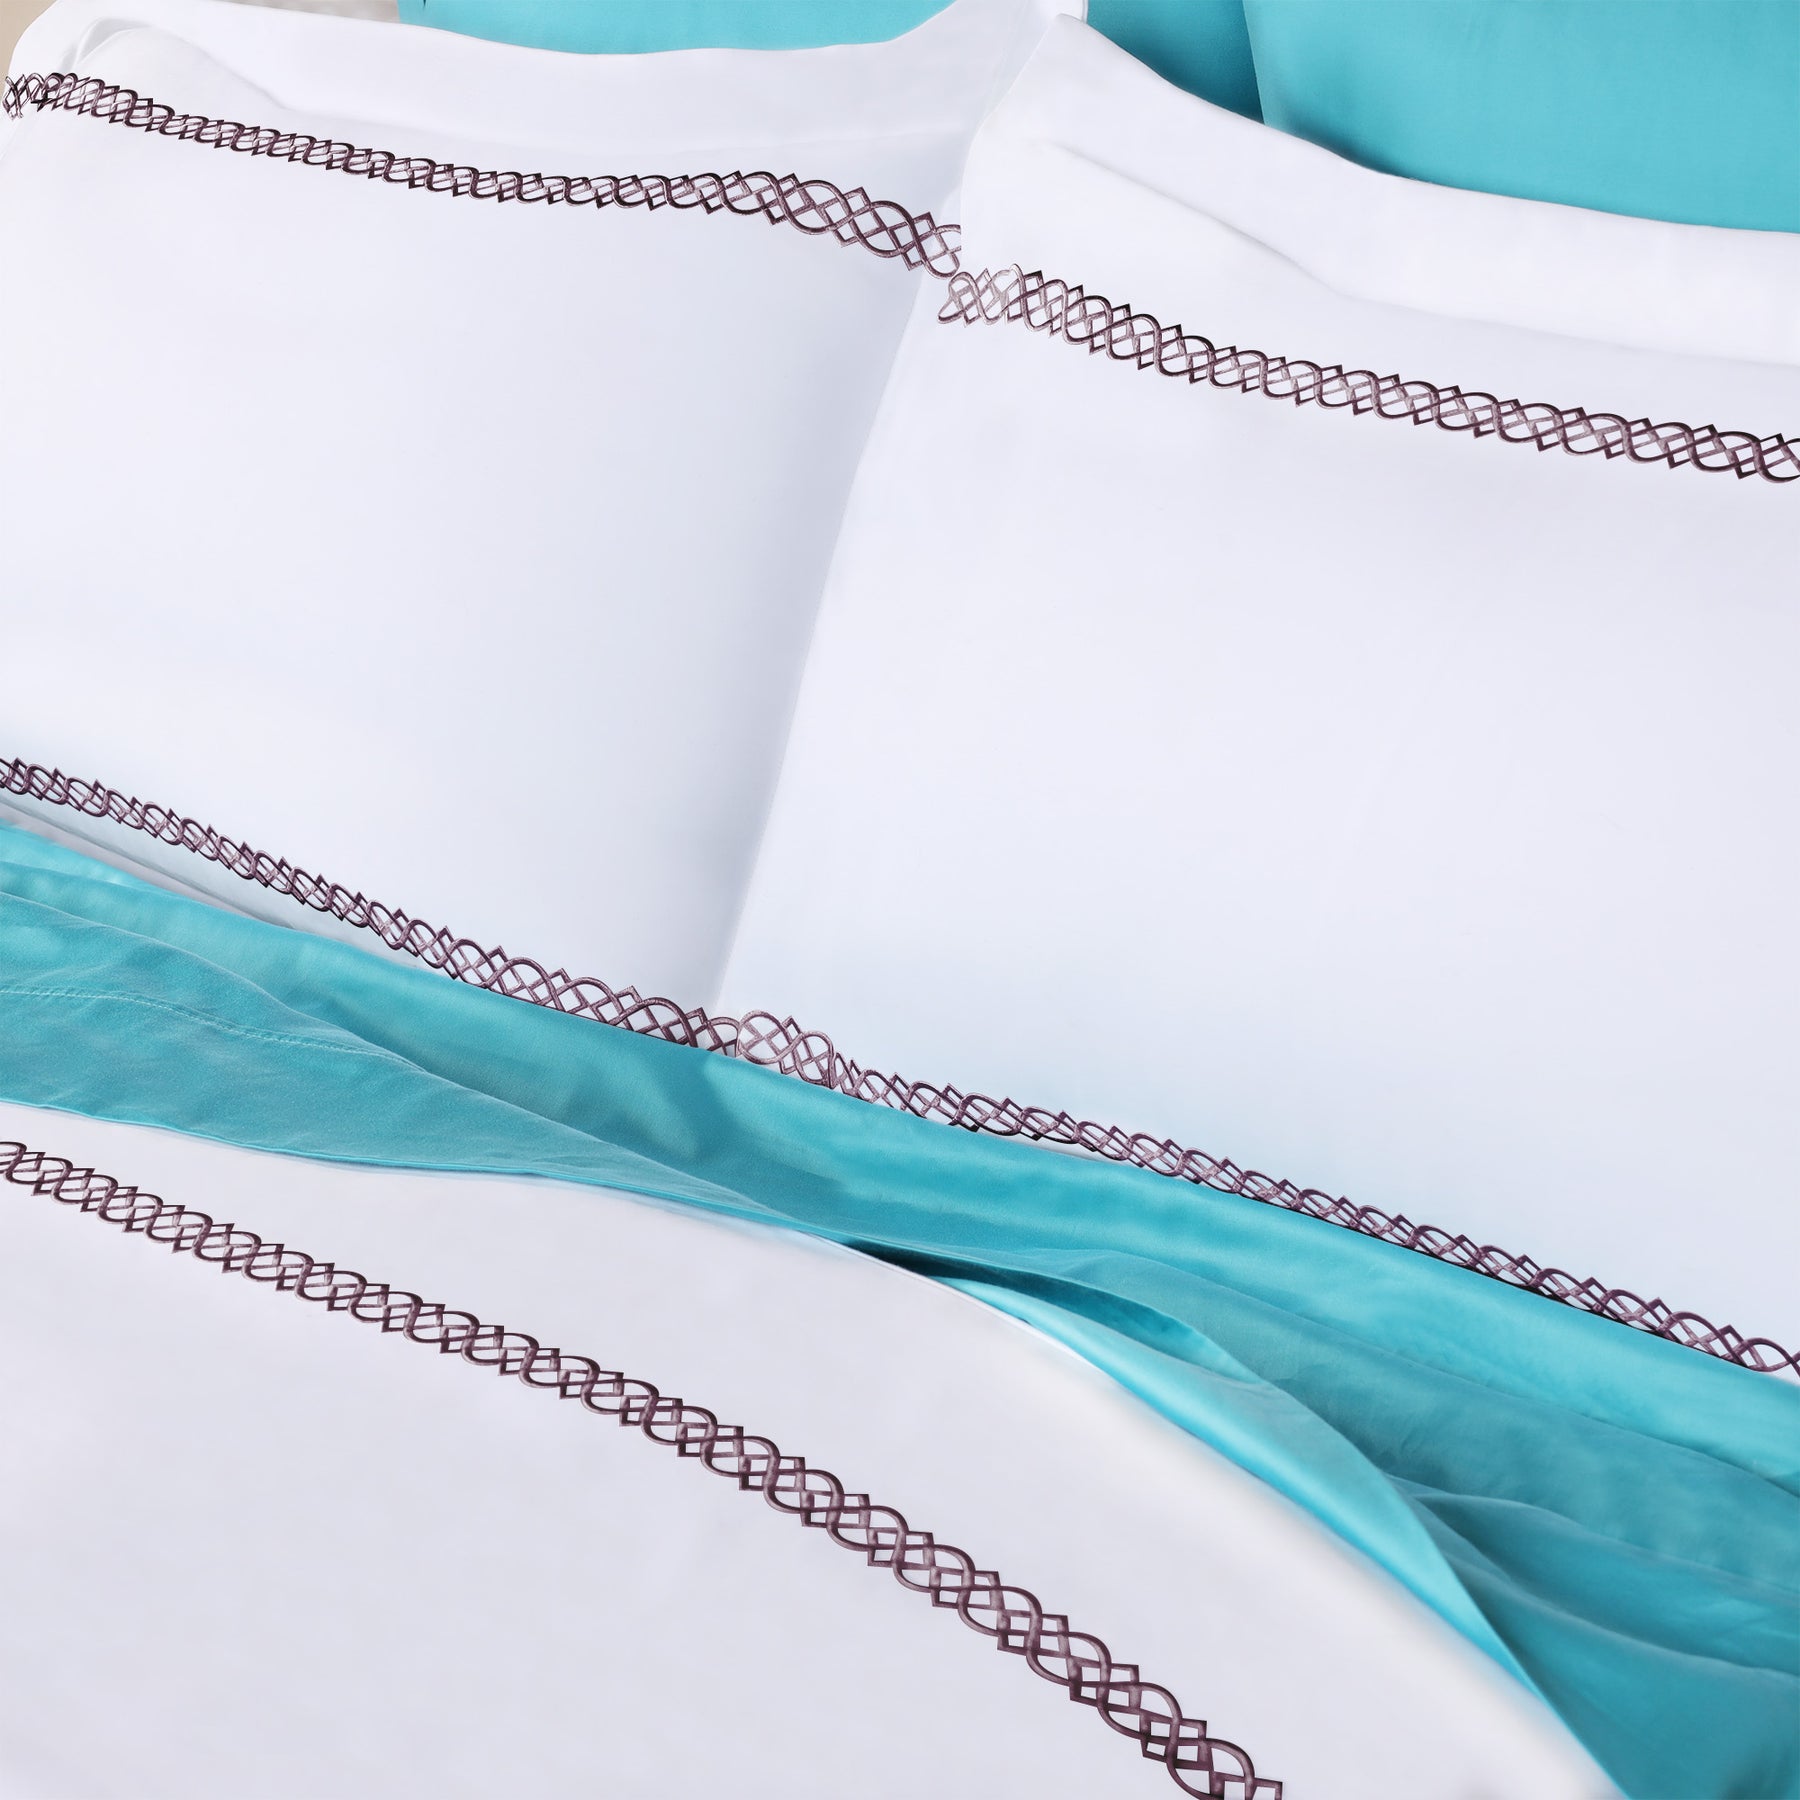 1000 Thread Count Egyptian Cotton Embroidered Duvet Cover Set - White/Plum